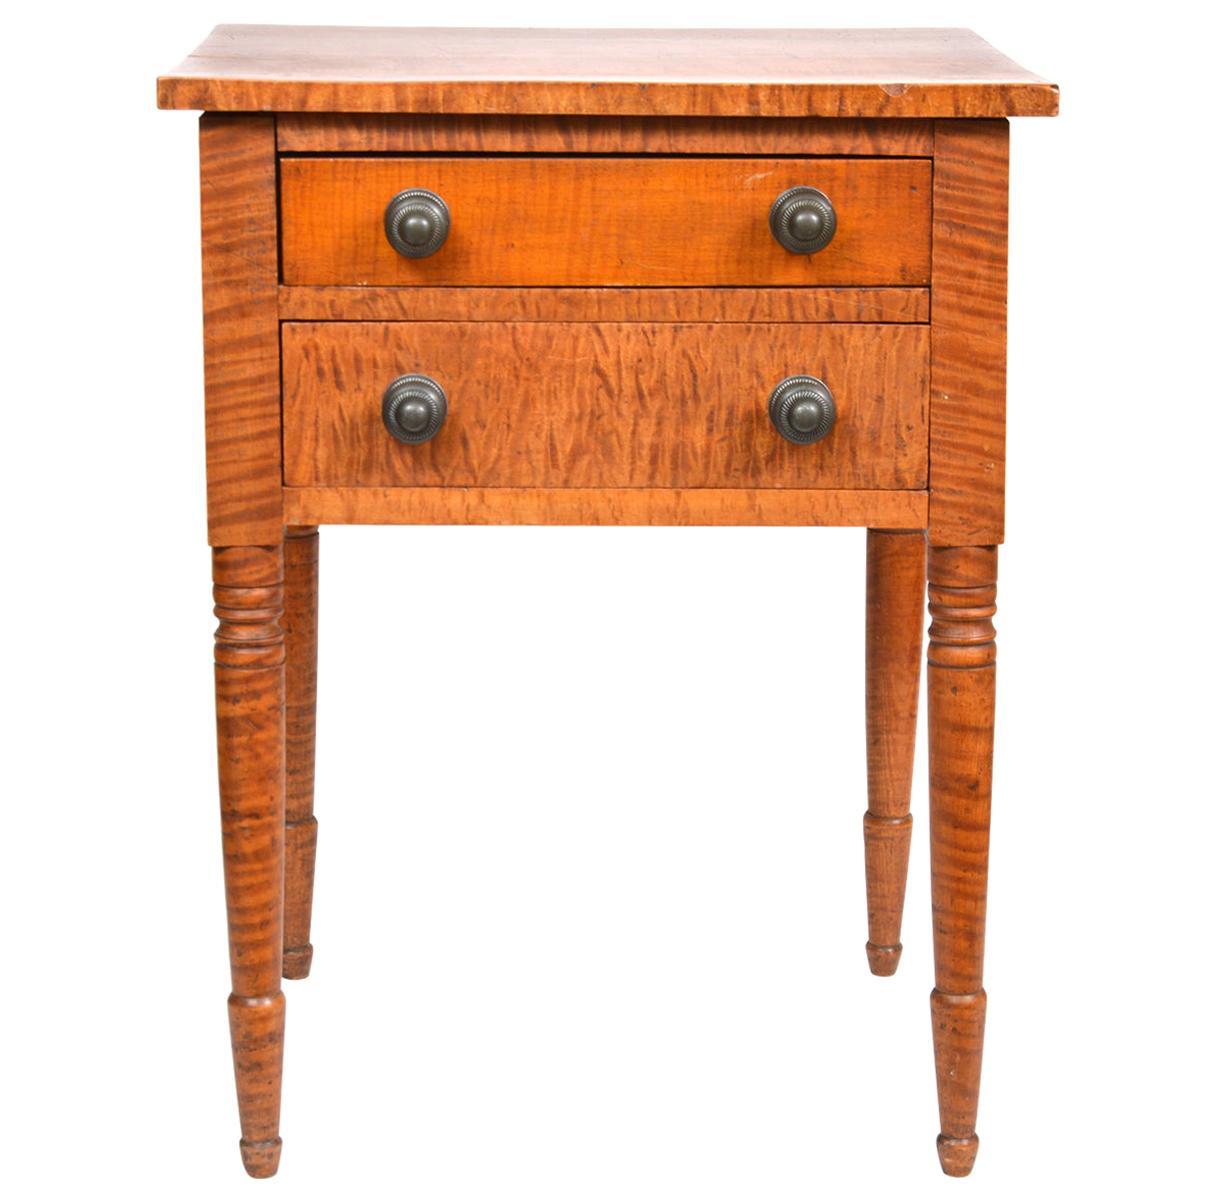 Early American Federal Two-Drawer Tiger Maple Work Table or Stand